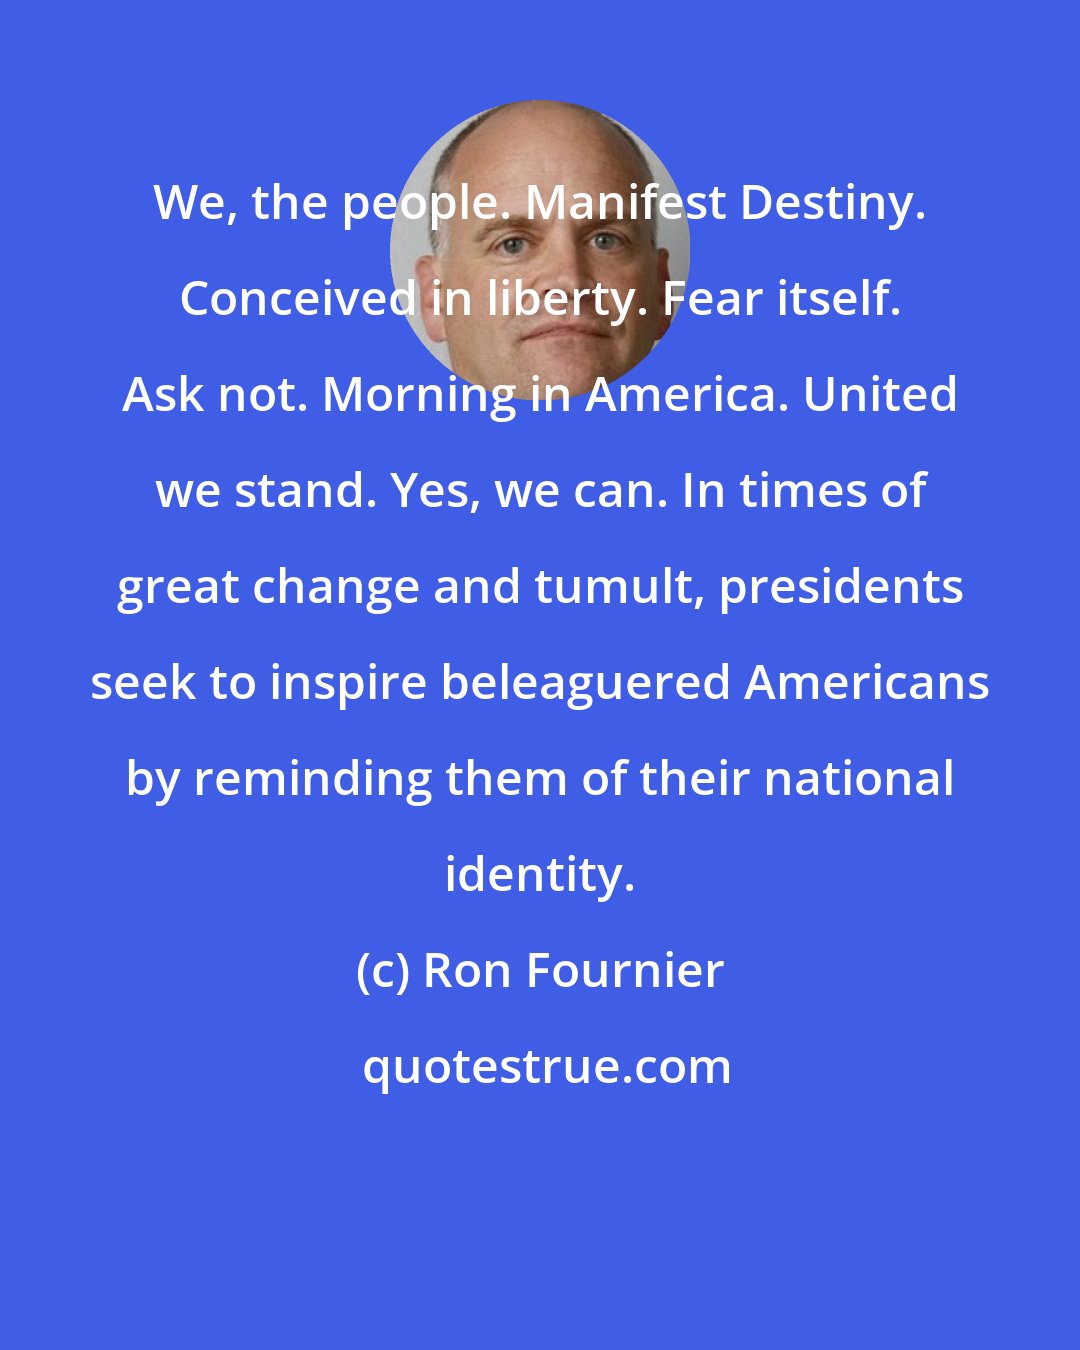 Ron Fournier: We, the people. Manifest Destiny. Conceived in liberty. Fear itself. Ask not. Morning in America. United we stand. Yes, we can. In times of great change and tumult, presidents seek to inspire beleaguered Americans by reminding them of their national identity.